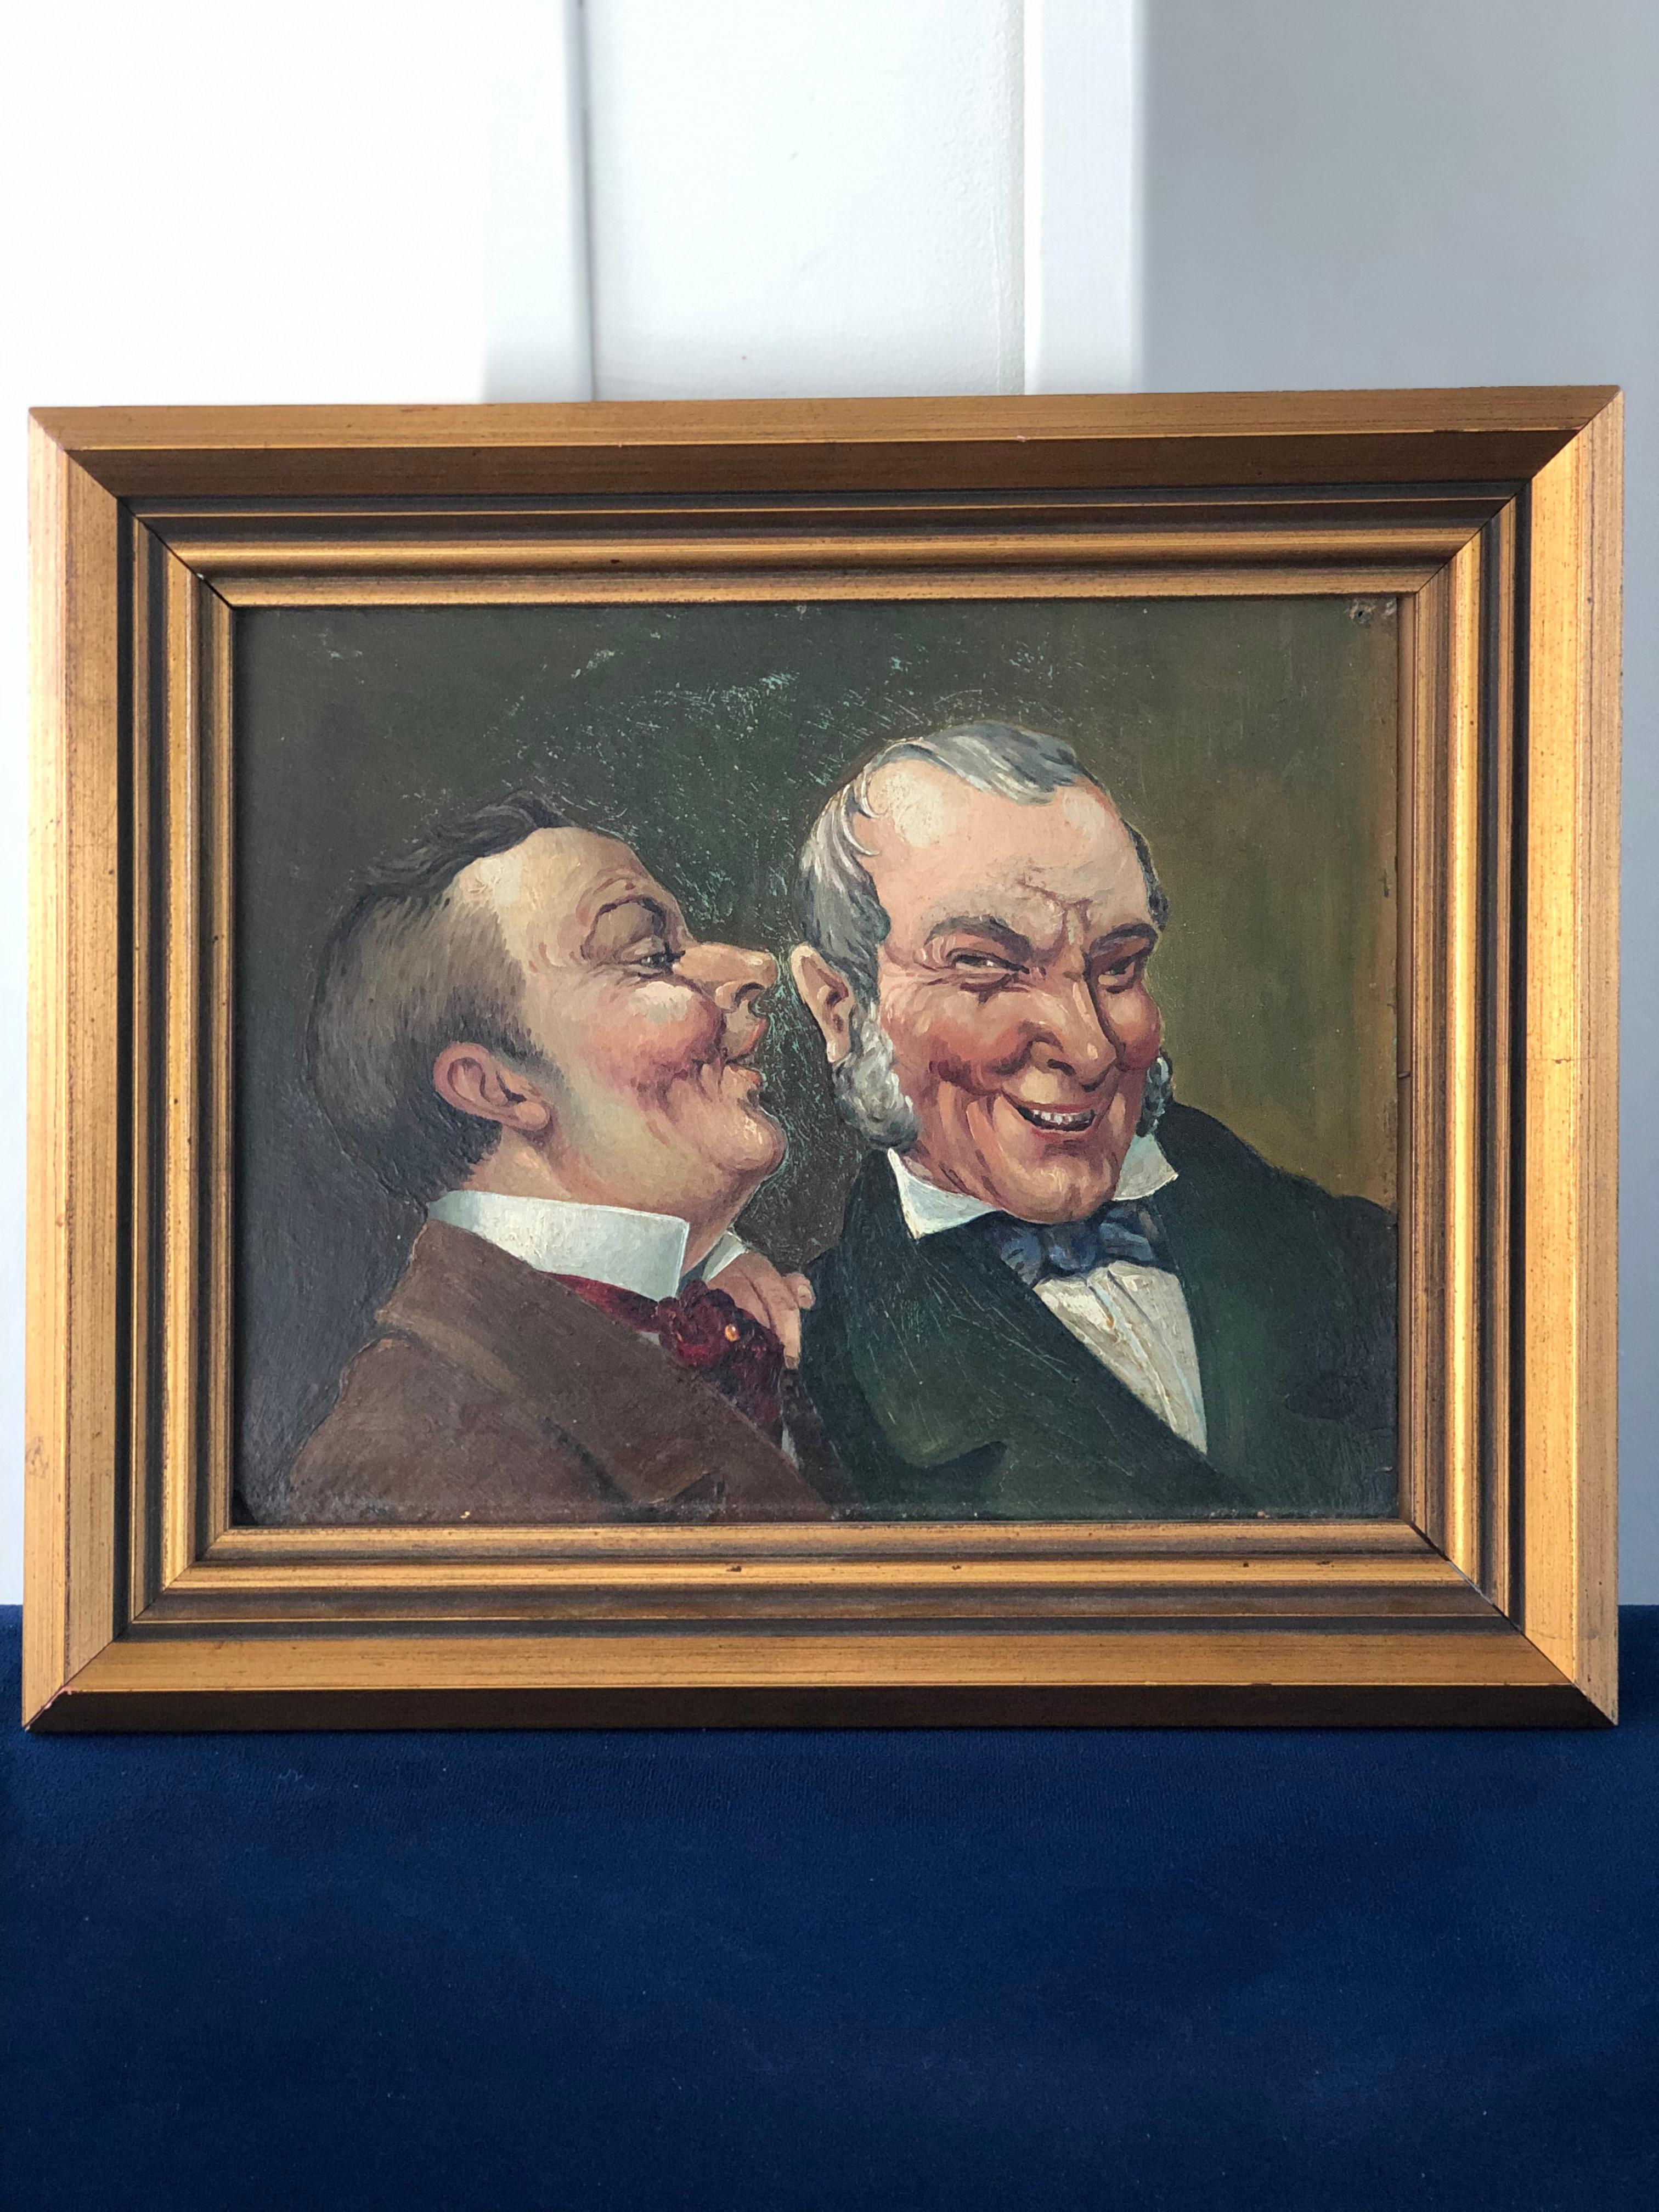 Capture a moment of camaraderie and laughter with this charming oil painting depicting two men sharing a funny moment. With vibrant strokes and expressive detail, the artist captures the warmth and humor of their laughter as they share a joke. The